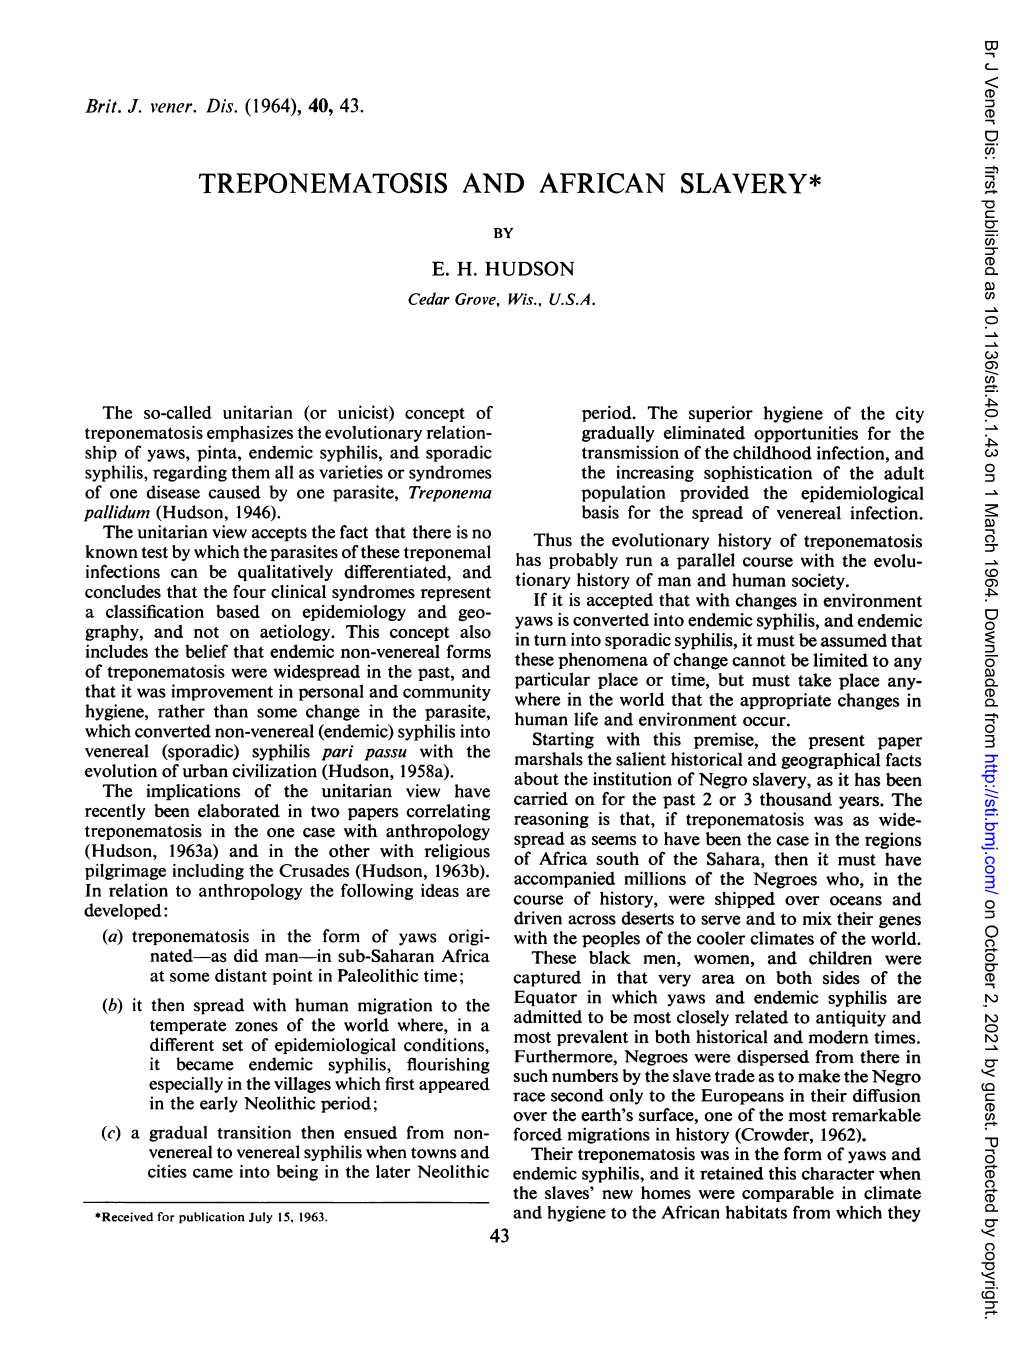 Treponematosis and African Slavery*